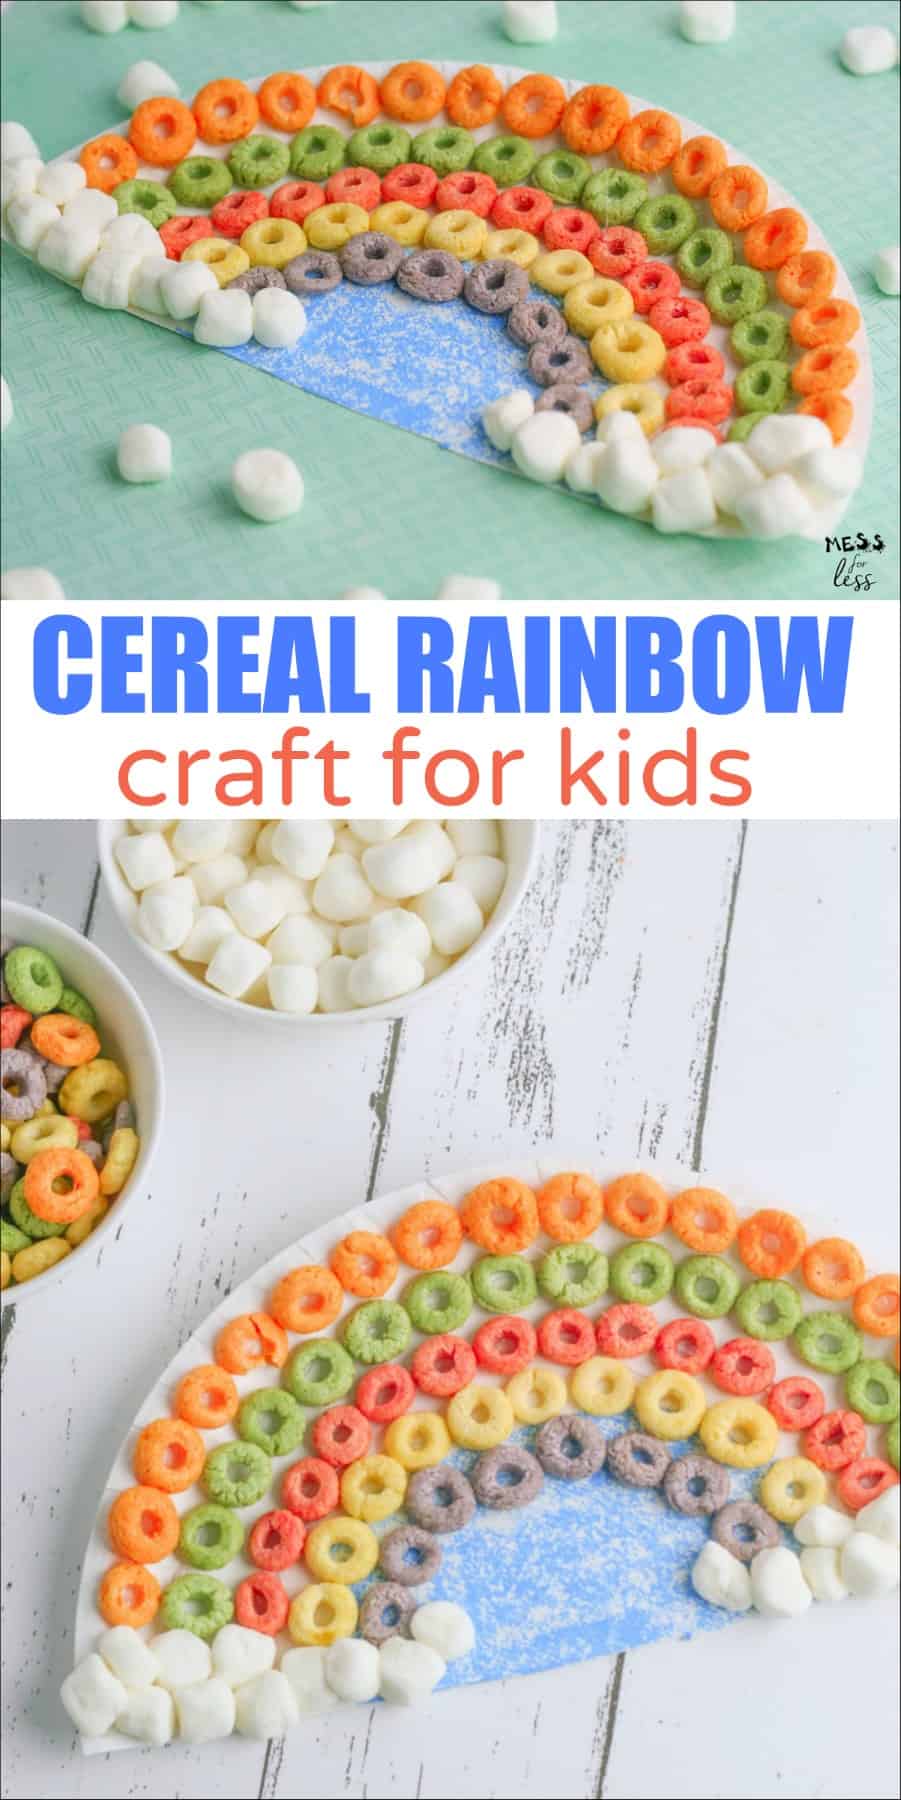 How to make a cereal rainbow craft - This adorable craft is perfect for spring or St. Patrick's Day. It is easy for kids to make and they can practice their fine motor skills while working on it.